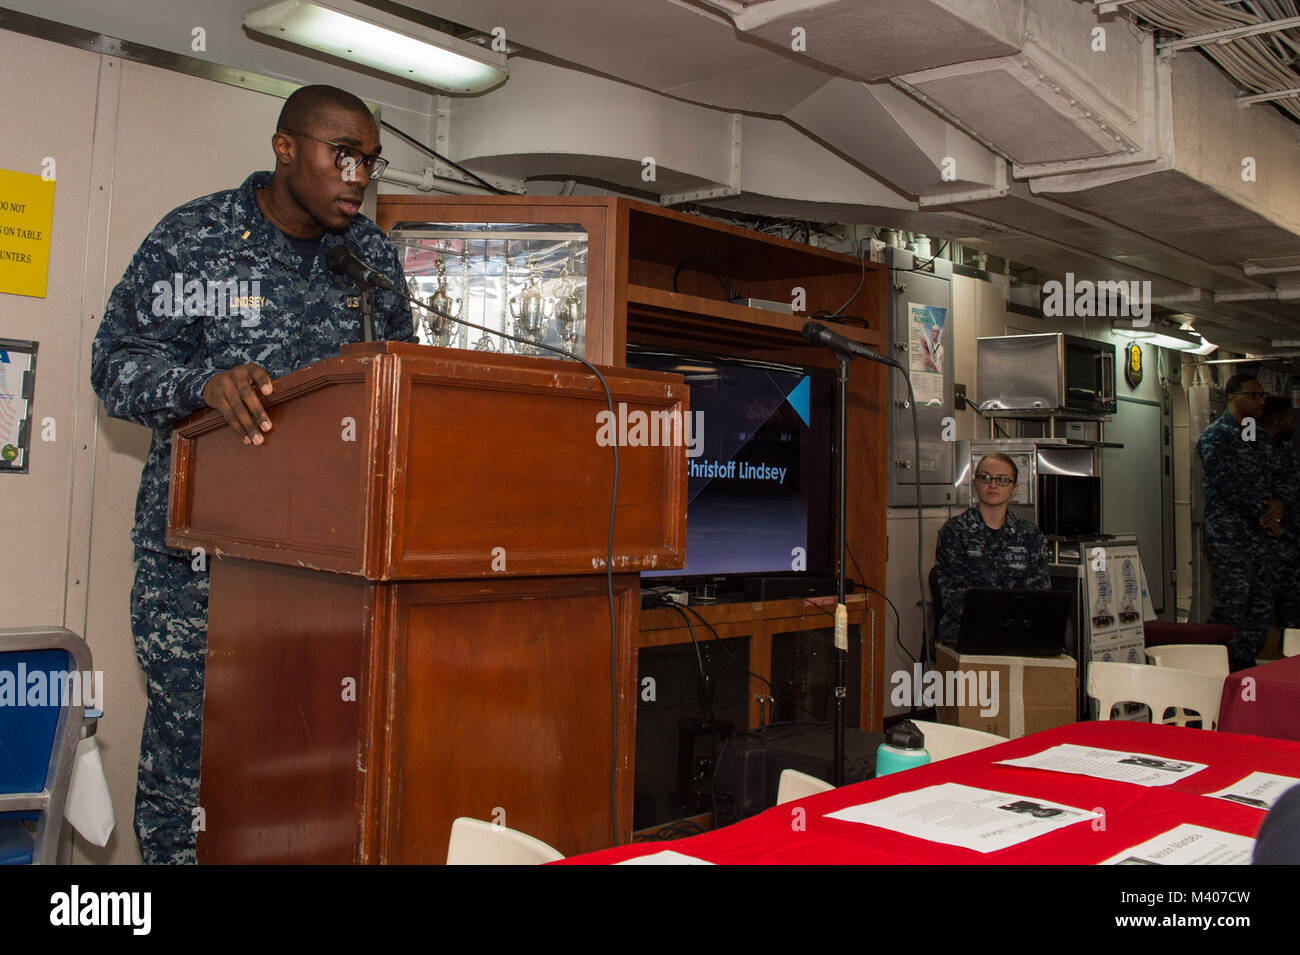 180207-N-NB544-025  SOUTH CHINA SEA (Feb. 7, 2018) Ensign Christoff Lindsey speaks to Sailors during an African American/Black History Month celebration on the mess decks of the amphibious assault ship USS Bonhomme Richard (LHD 6). Bonhomme Richard is operating in the Indo-Asia-Pacific region as part of a regularly scheduled patrol and provides a rapid-response capability in the event of a regional contingency or natural disaster. (U.S. Navy photo by Mass Communication Specialist 2nd Class Kyle Carlstrom/Released) Stock Photo